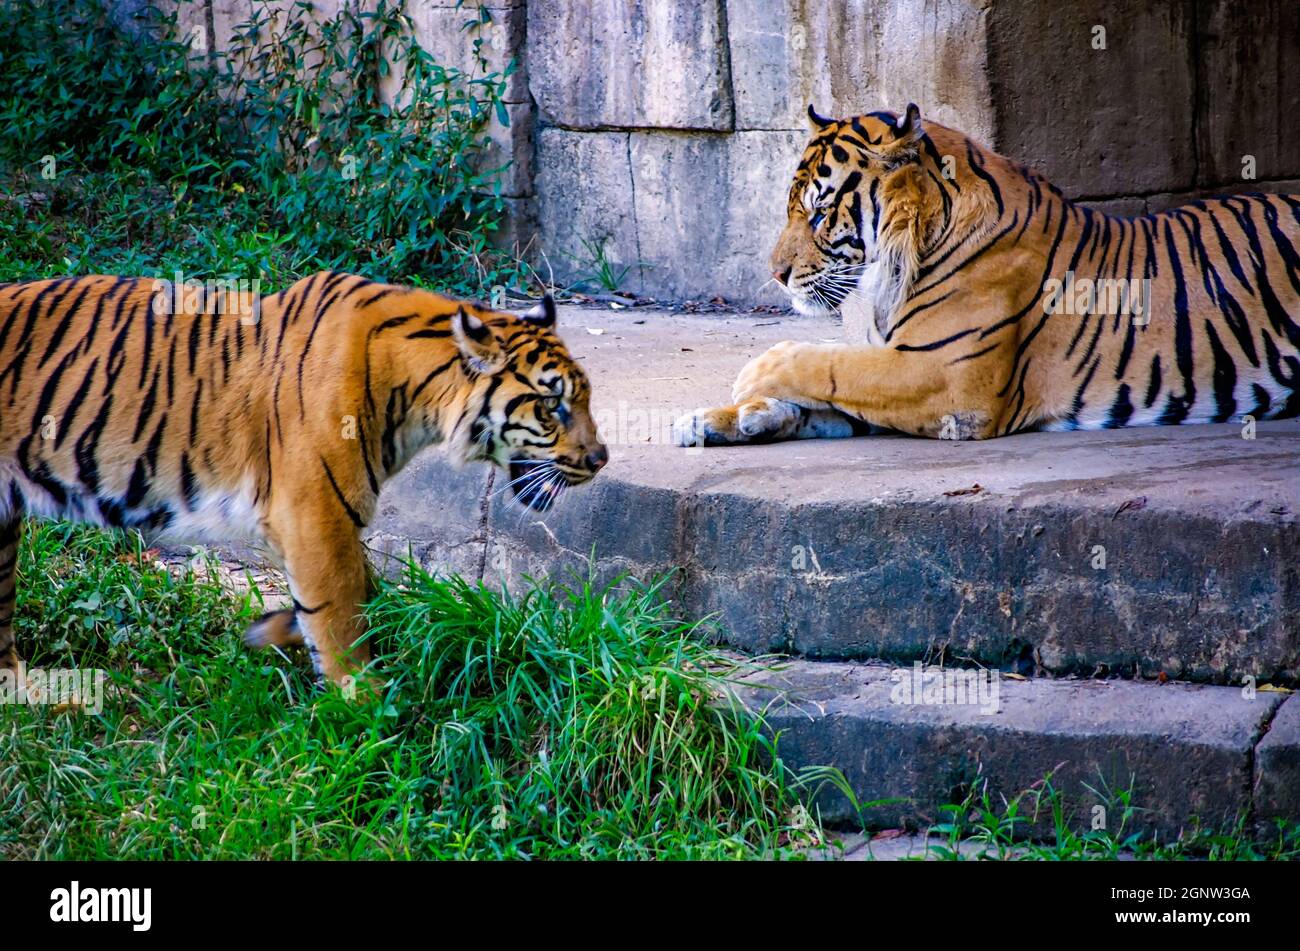 Sumatran tigers (Panthera tigris sumatrae)  are pictured at the Memphis Zoo, Sept. 8, 2015, in Memphis, Tennessee. Stock Photo